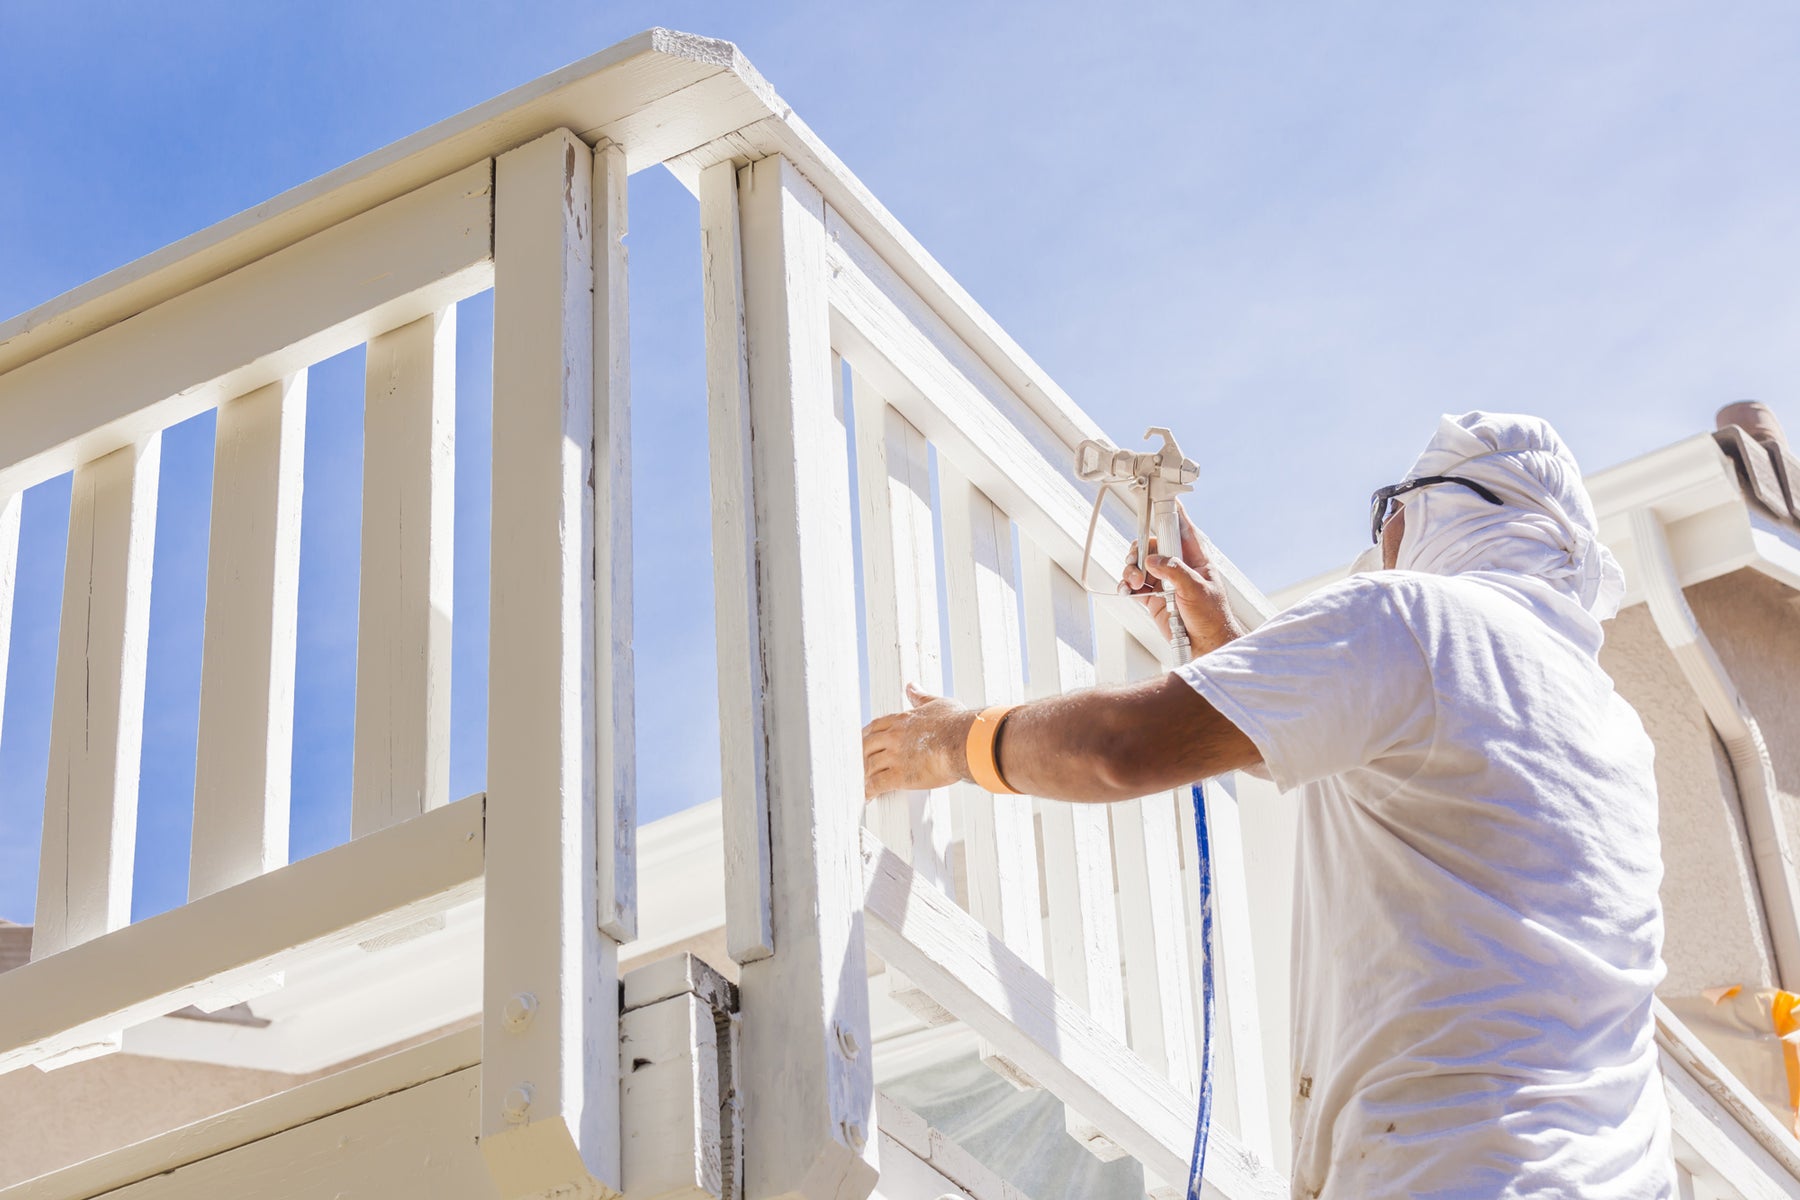 The Dangers of Painting in High Humidity or Extreme Temperatures